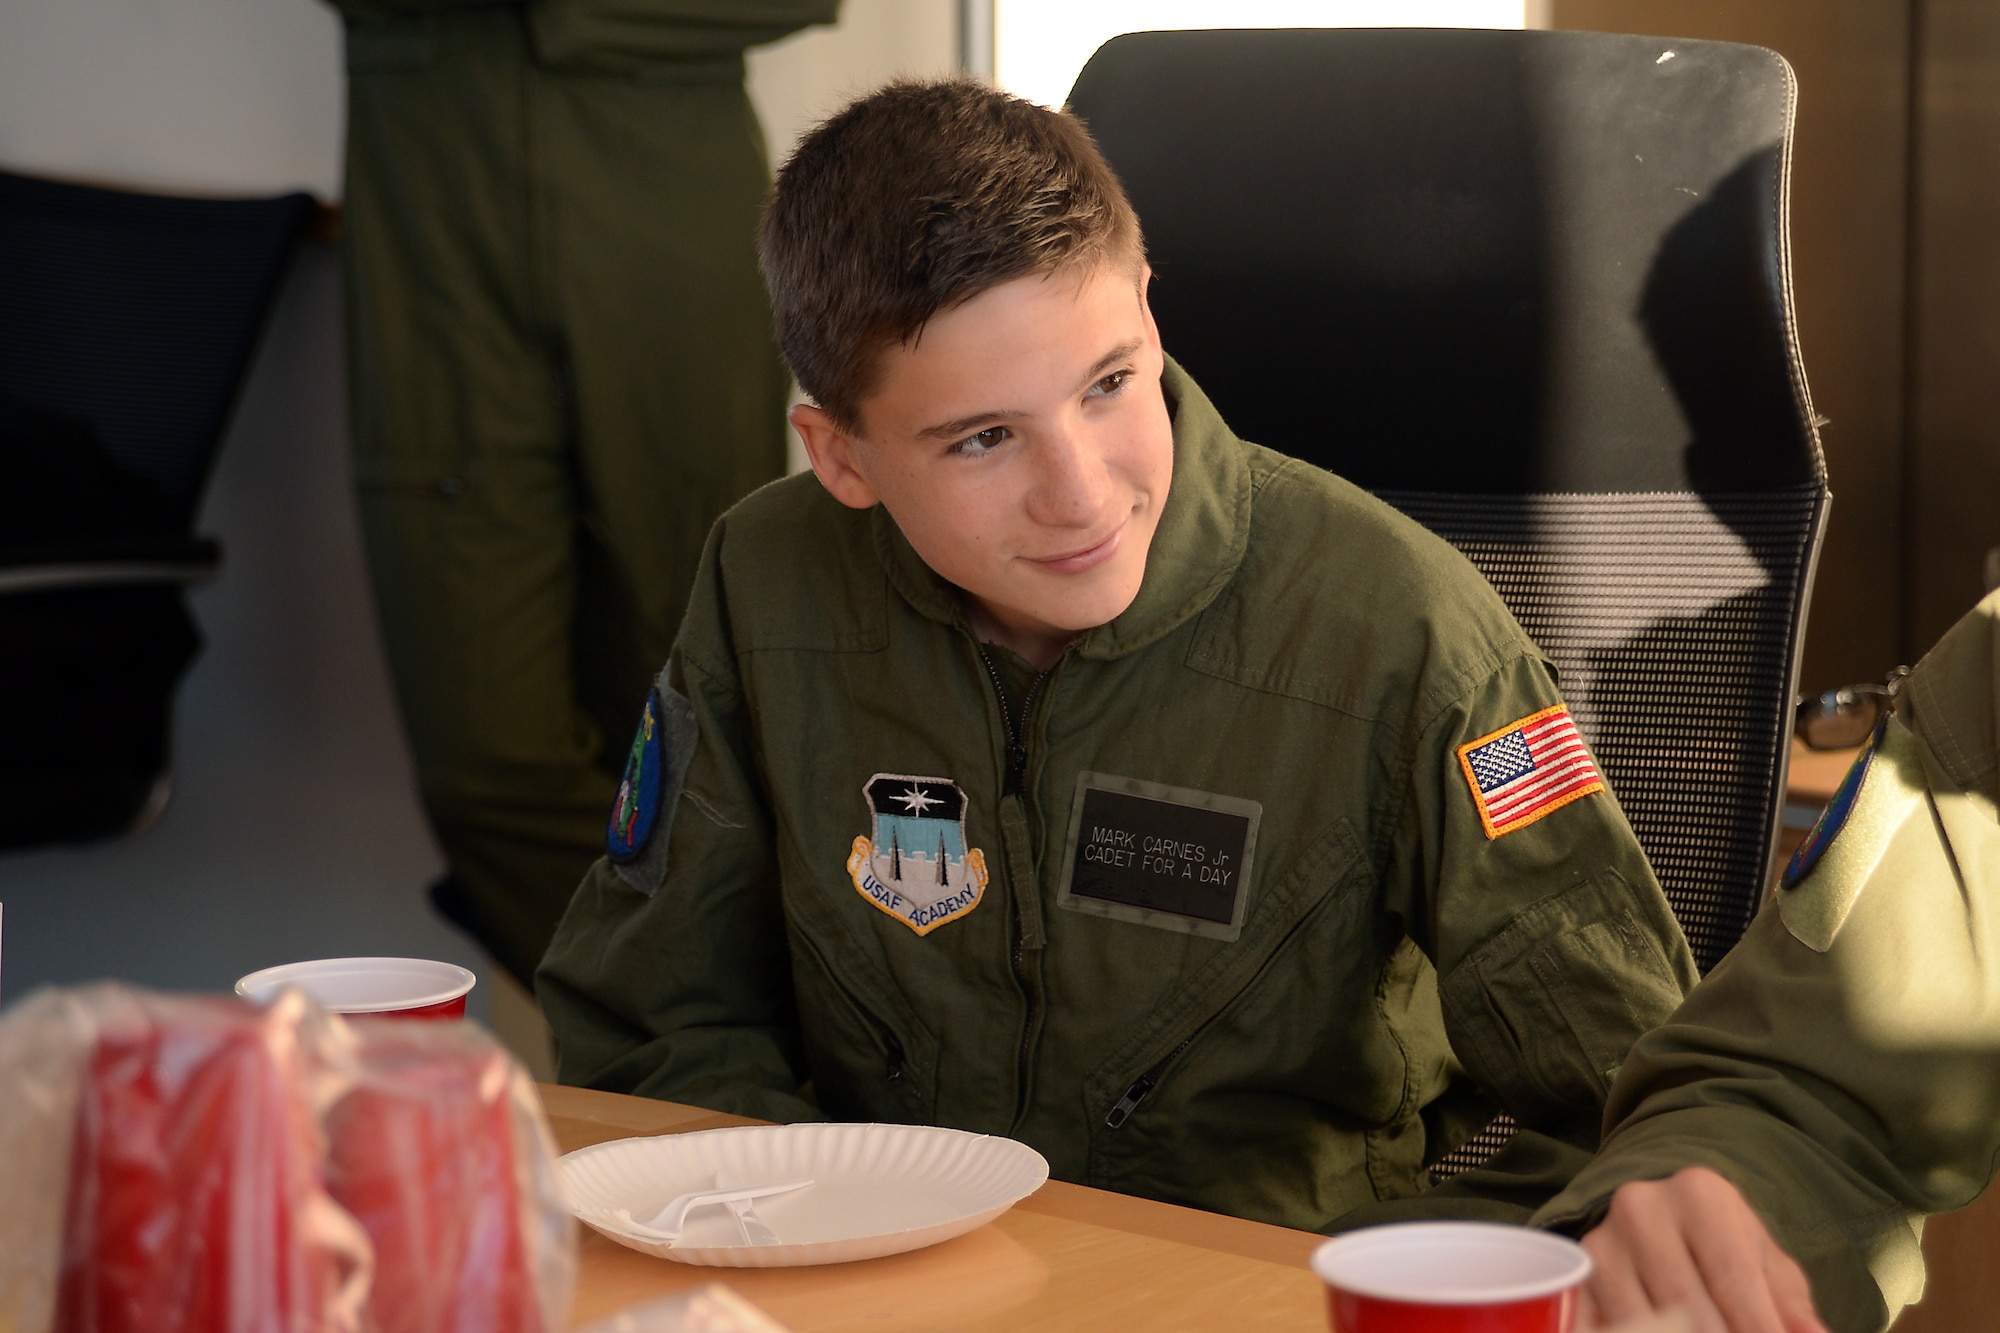 Mark Carnes, 15, eats breakfast with cadets and staff at the U.S. Air Force Academy, Nov. 10, 2016. Carnes became an Academy cadet for a day through the Cadet for a Day program run by the Academy and the Make a Wish Foundation since 2000. The program allows children with severe medical conditions to achieve their dreams of becoming an Academy cadet. (U.S. Air Force photo/Darcie Ibidapo) 